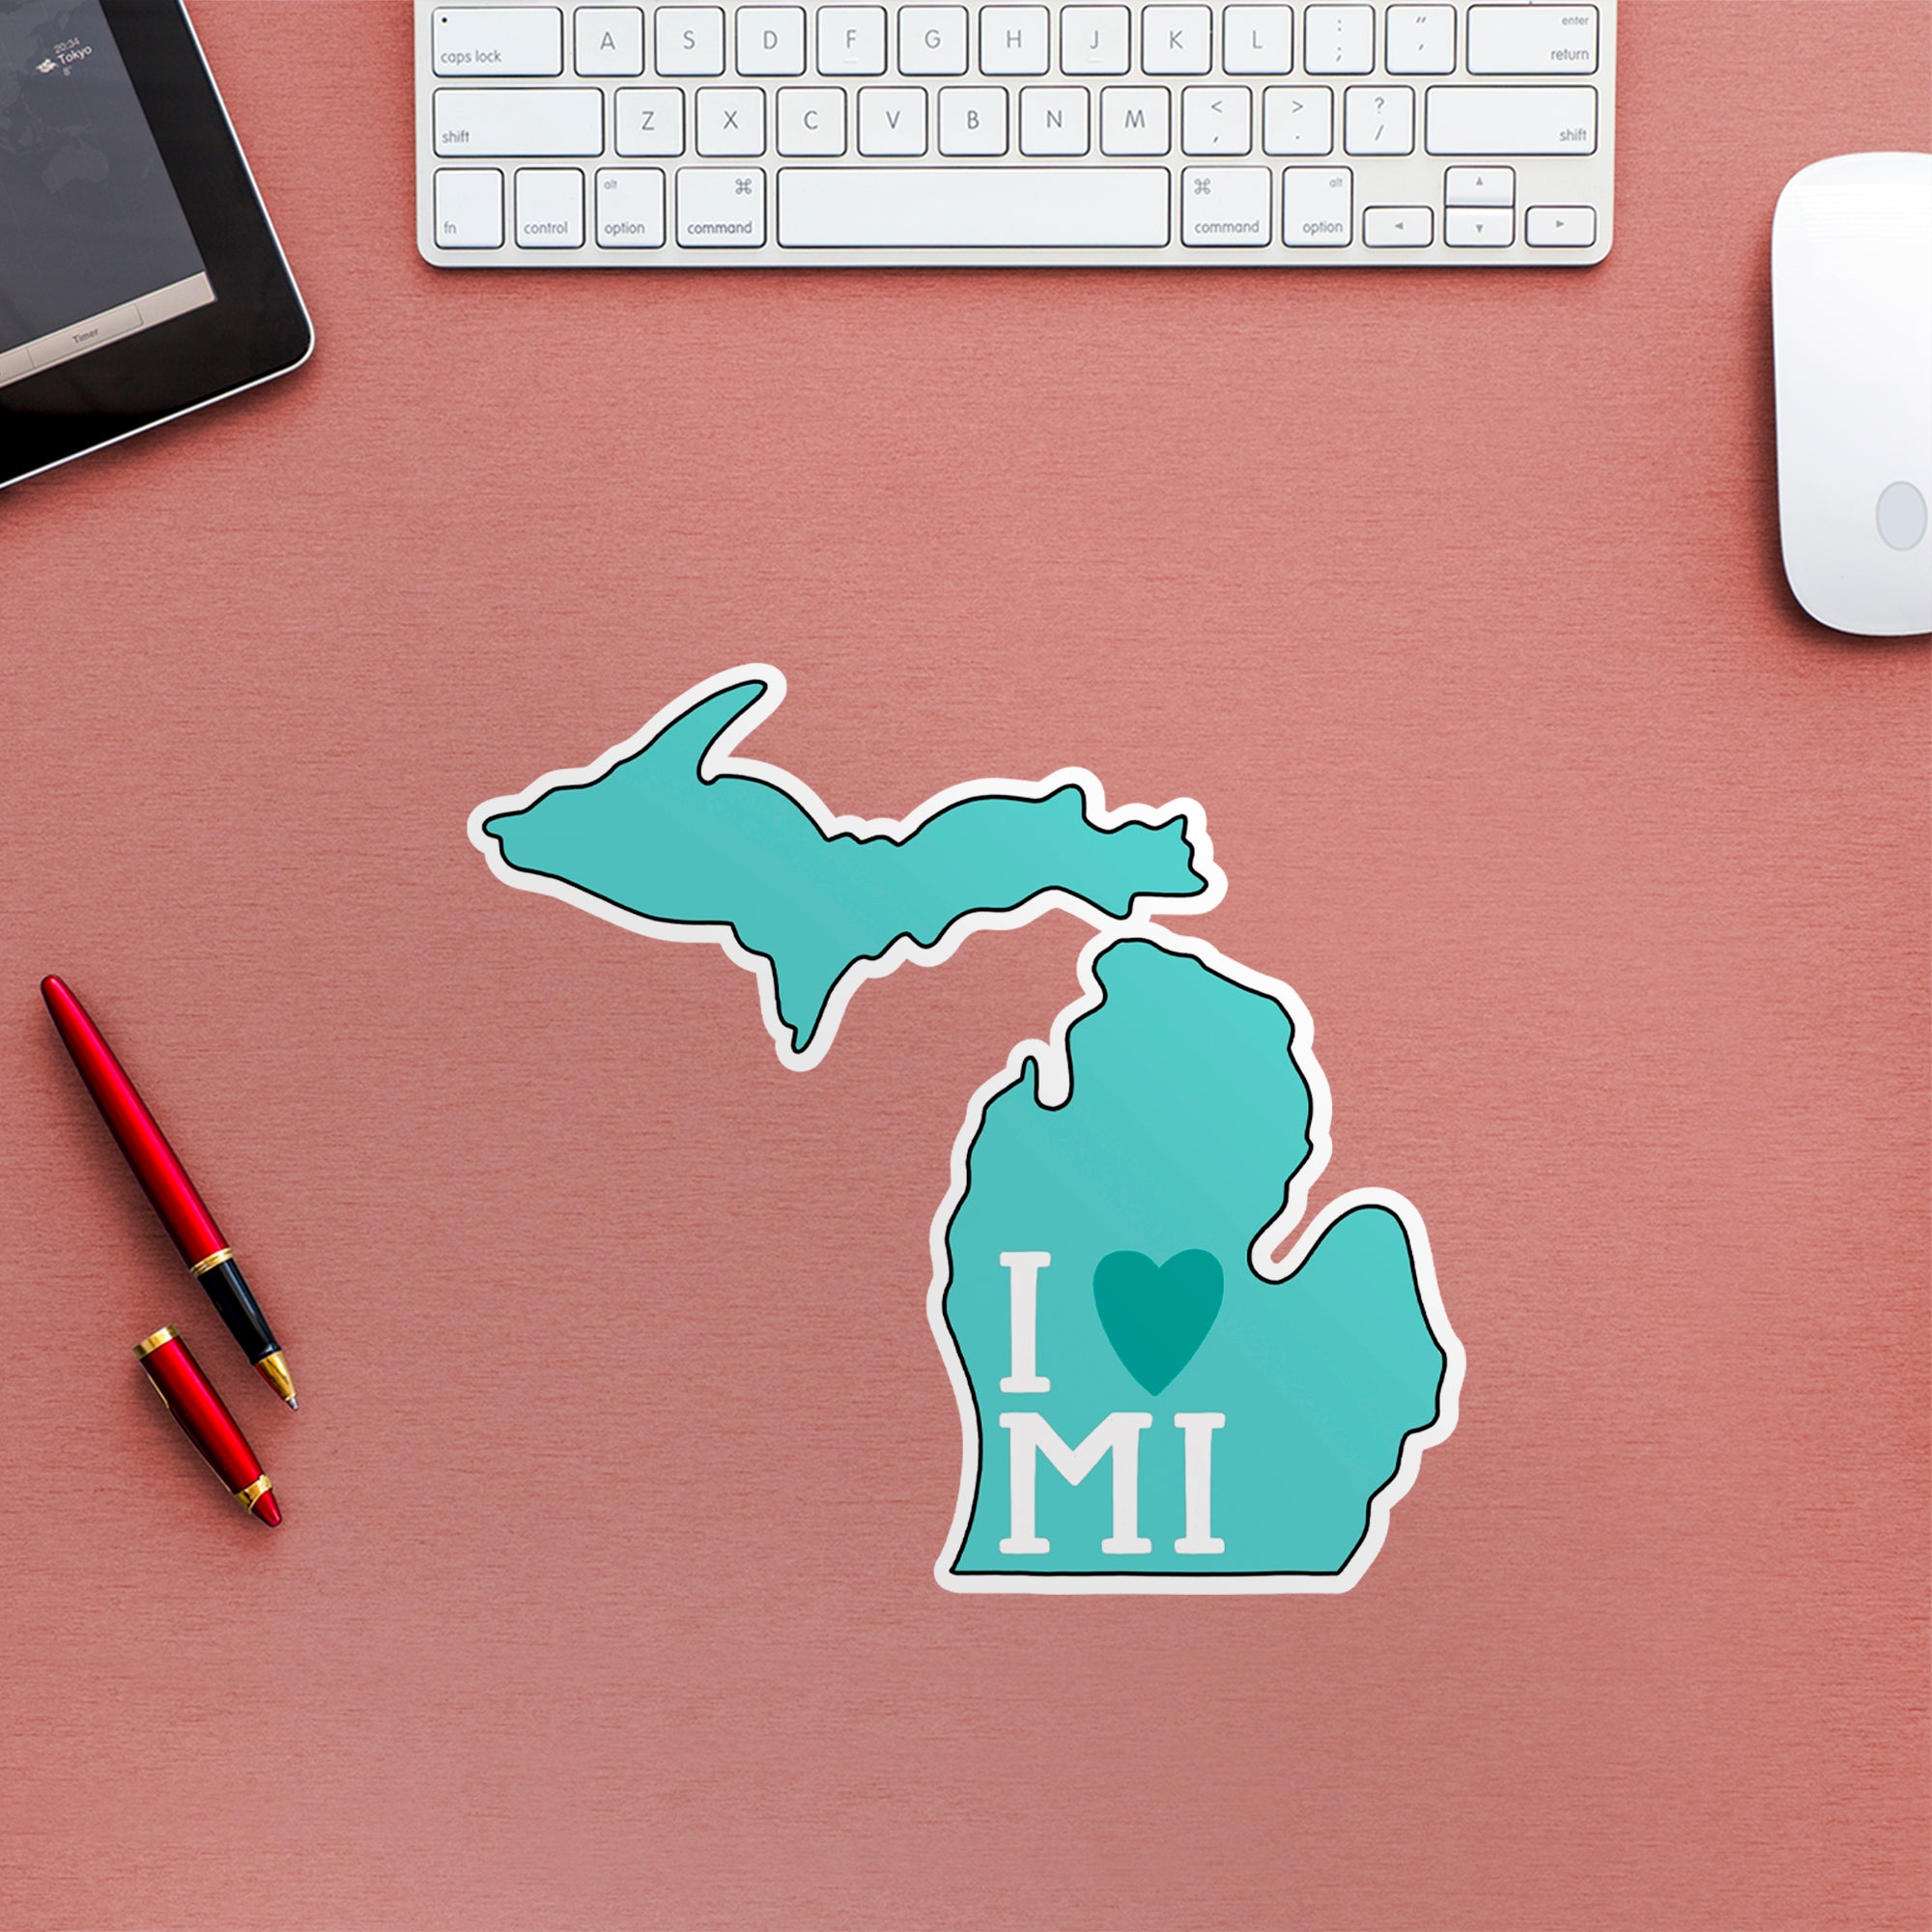 I Love Michigan - Officially Licensed Big Moods Removable Wall Decal Large by Fathead | Vinyl